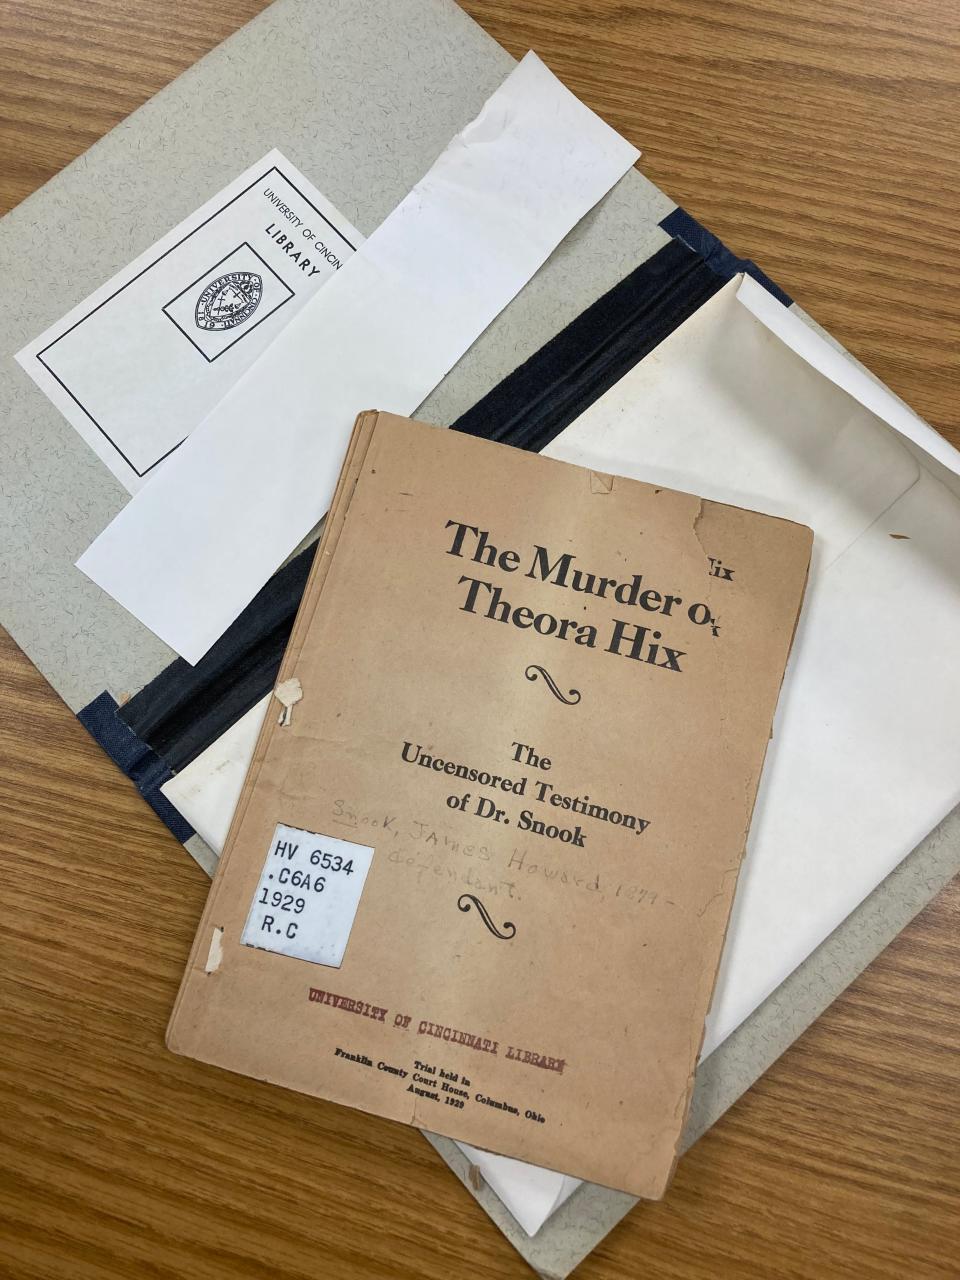 The University of Cincinnati's Archives and Rare Books Library houses one of the few surviving booklets of transcripts from the murder trial against Ohio State University veterinary medicine professor James Snook, convicted in the 1929 murder of coed Theora Hix.